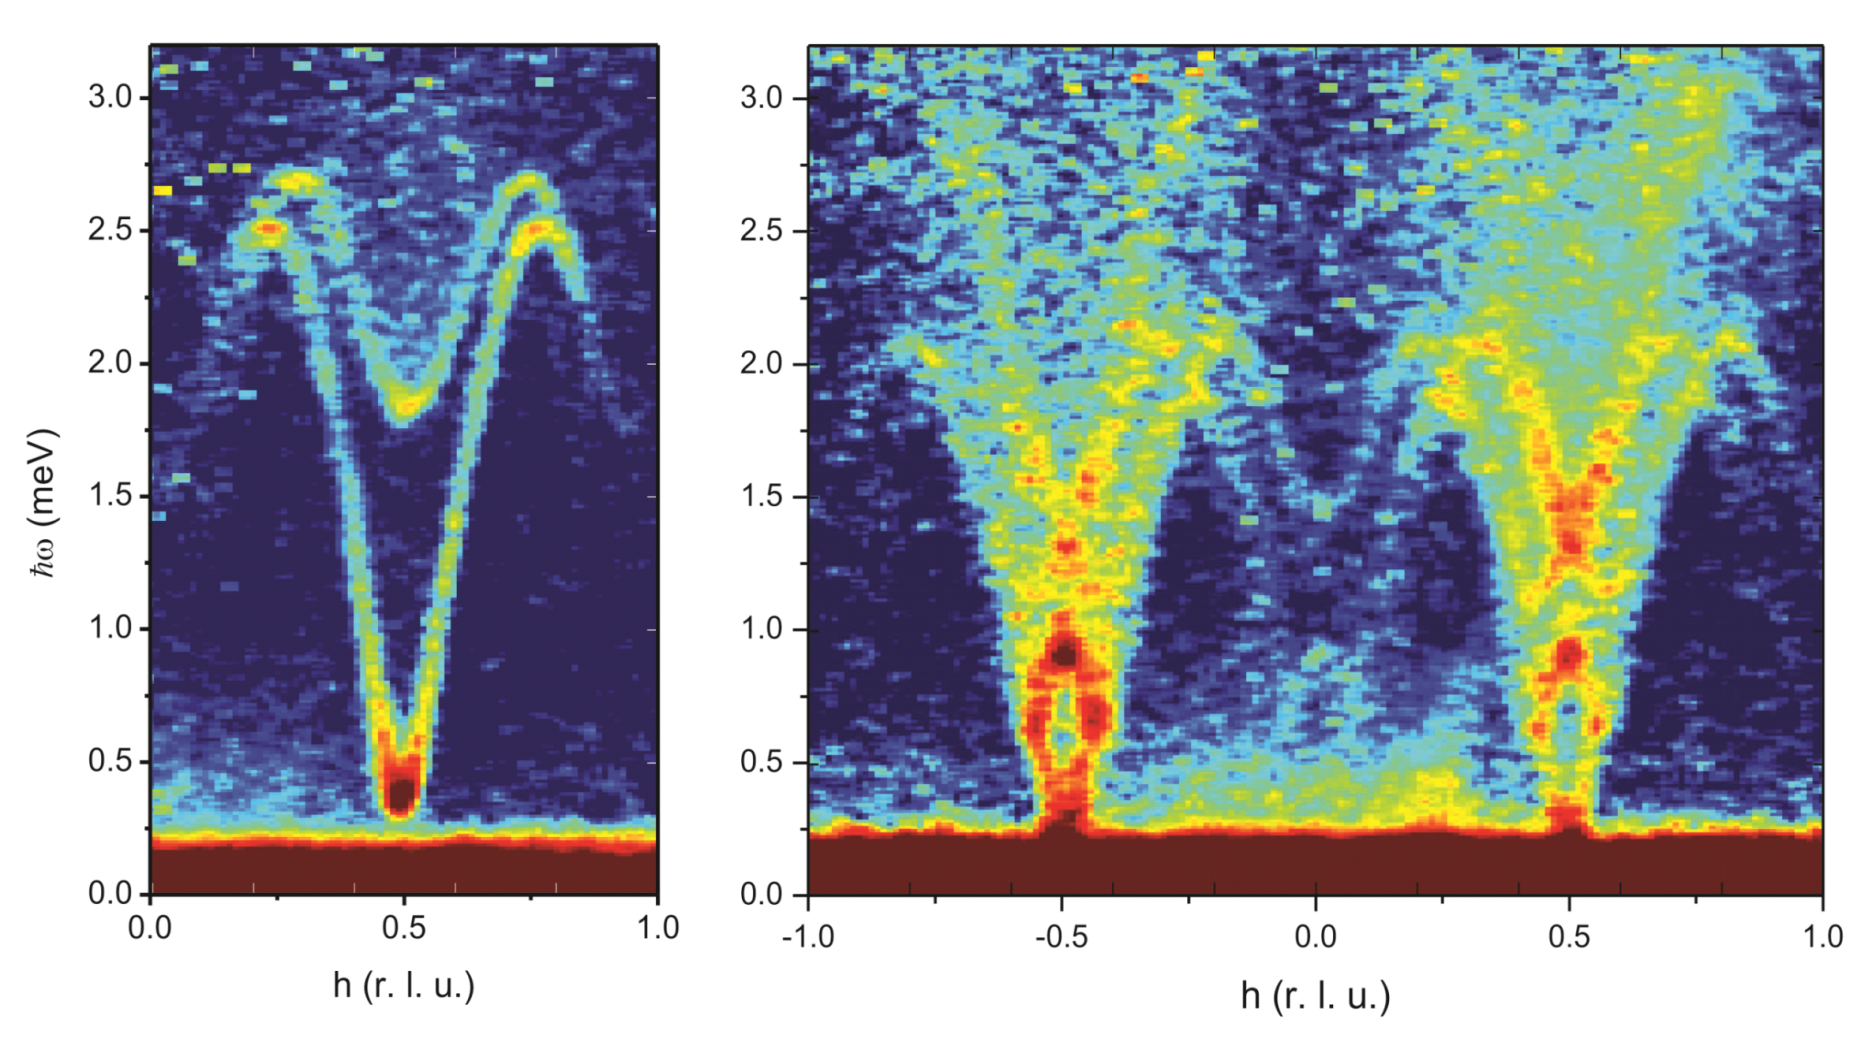 Neutron scattering spectra in the quantum paramagnet (left) and Tomonaga-Luttinger Spin Liquid (right) phases of the quantum spin ladder material DIMPY [ Schmidiger et al, Phys. Rev. Lett. 111, 107202 (2013)].